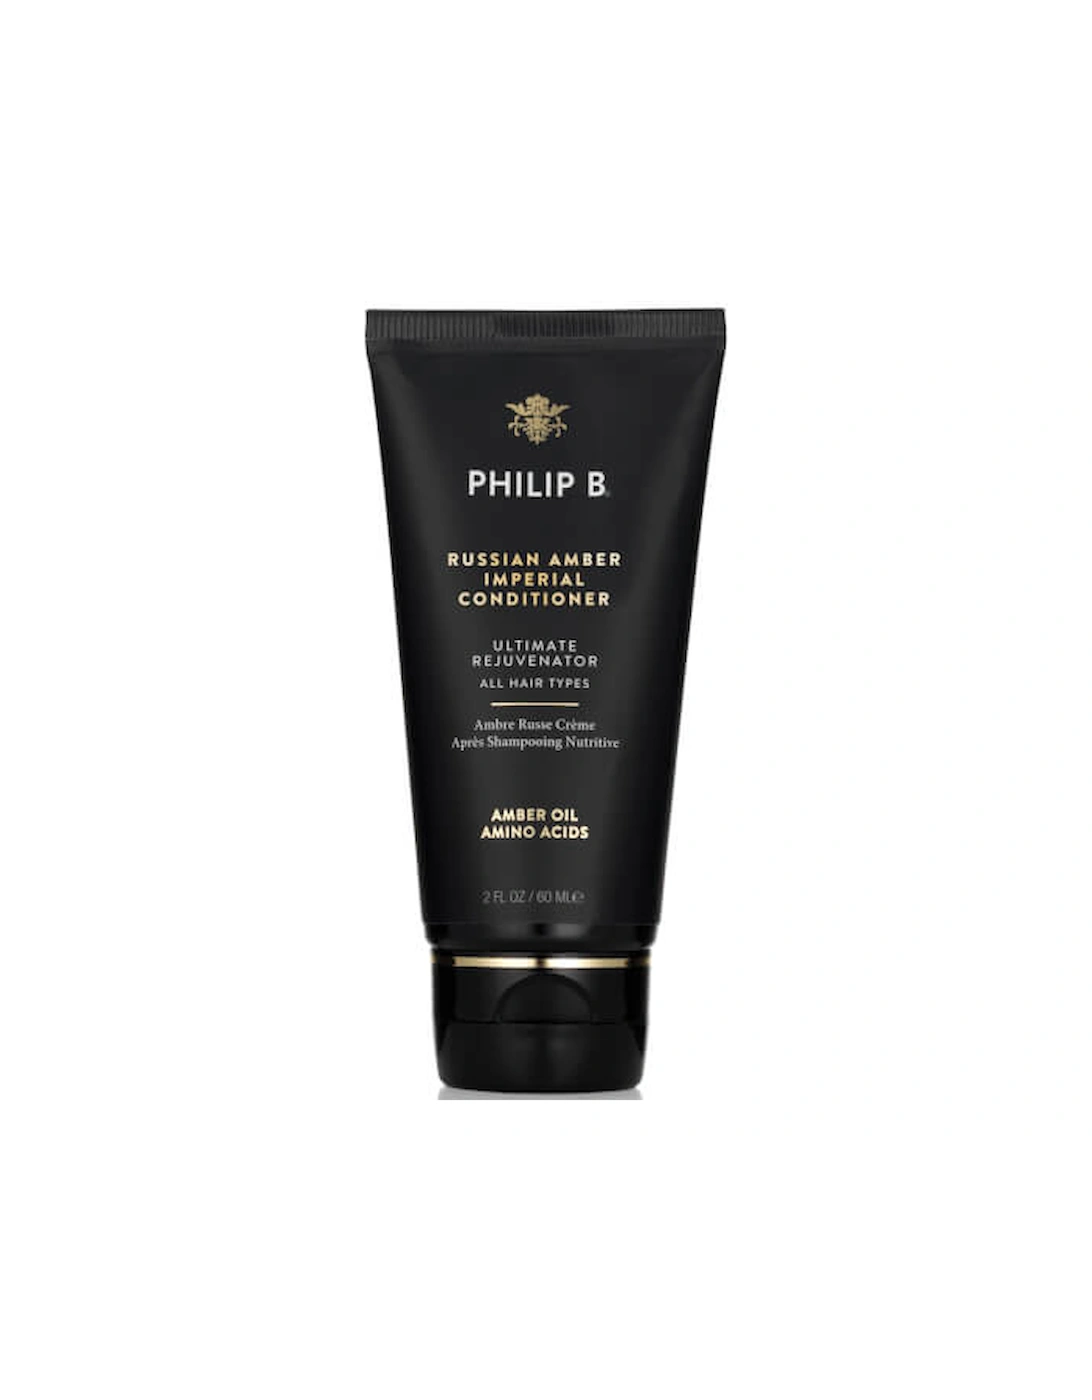 Russian Amber Imperial Conditioning Crème (60ml) - Philip B, 2 of 1